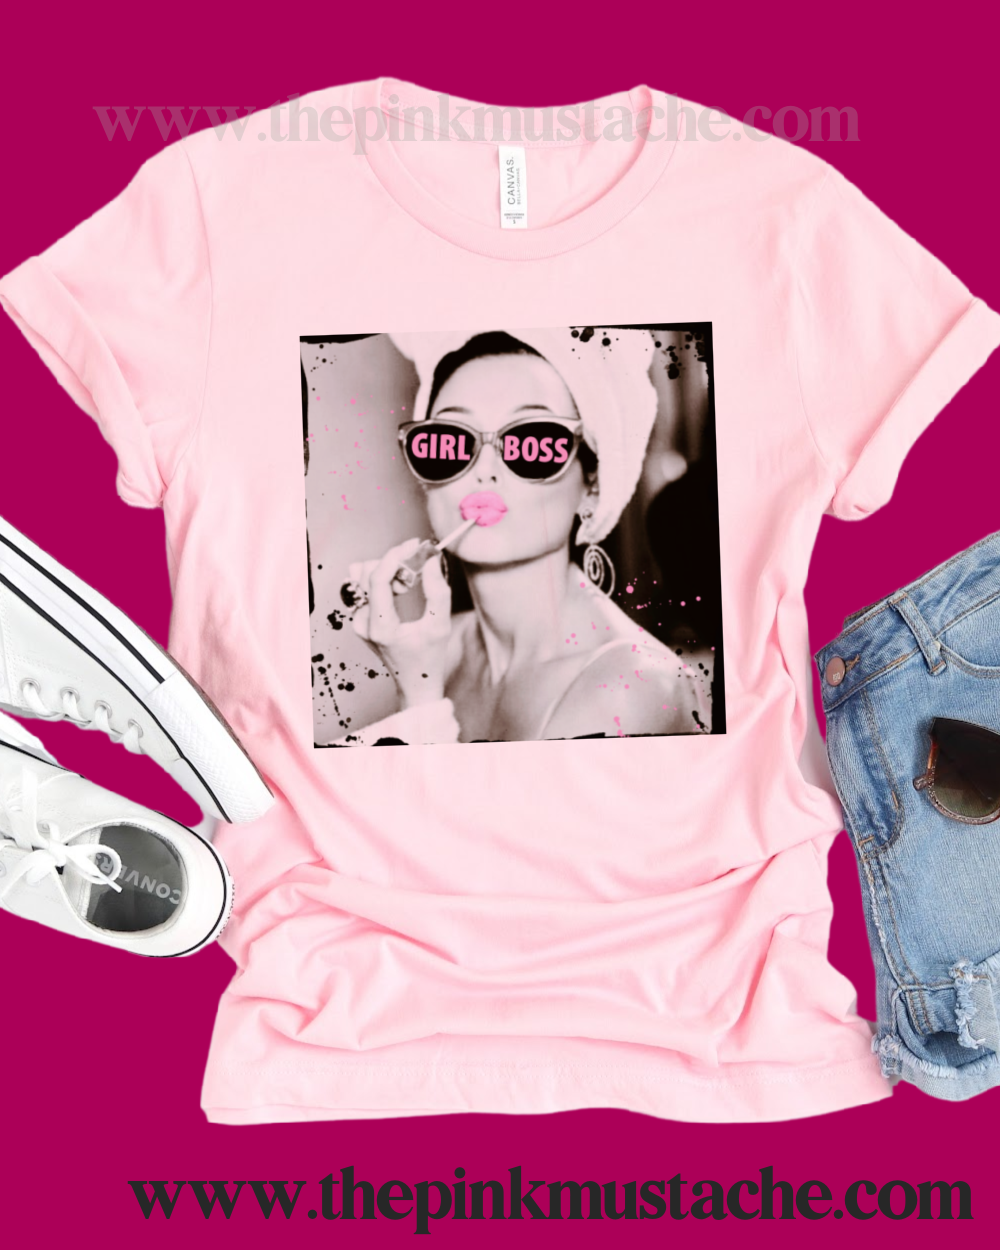 Girl Boss Soft Style Hepburn Tee/ Women Supporting Women T-Shirt/ Youth and Adult Sizes Available